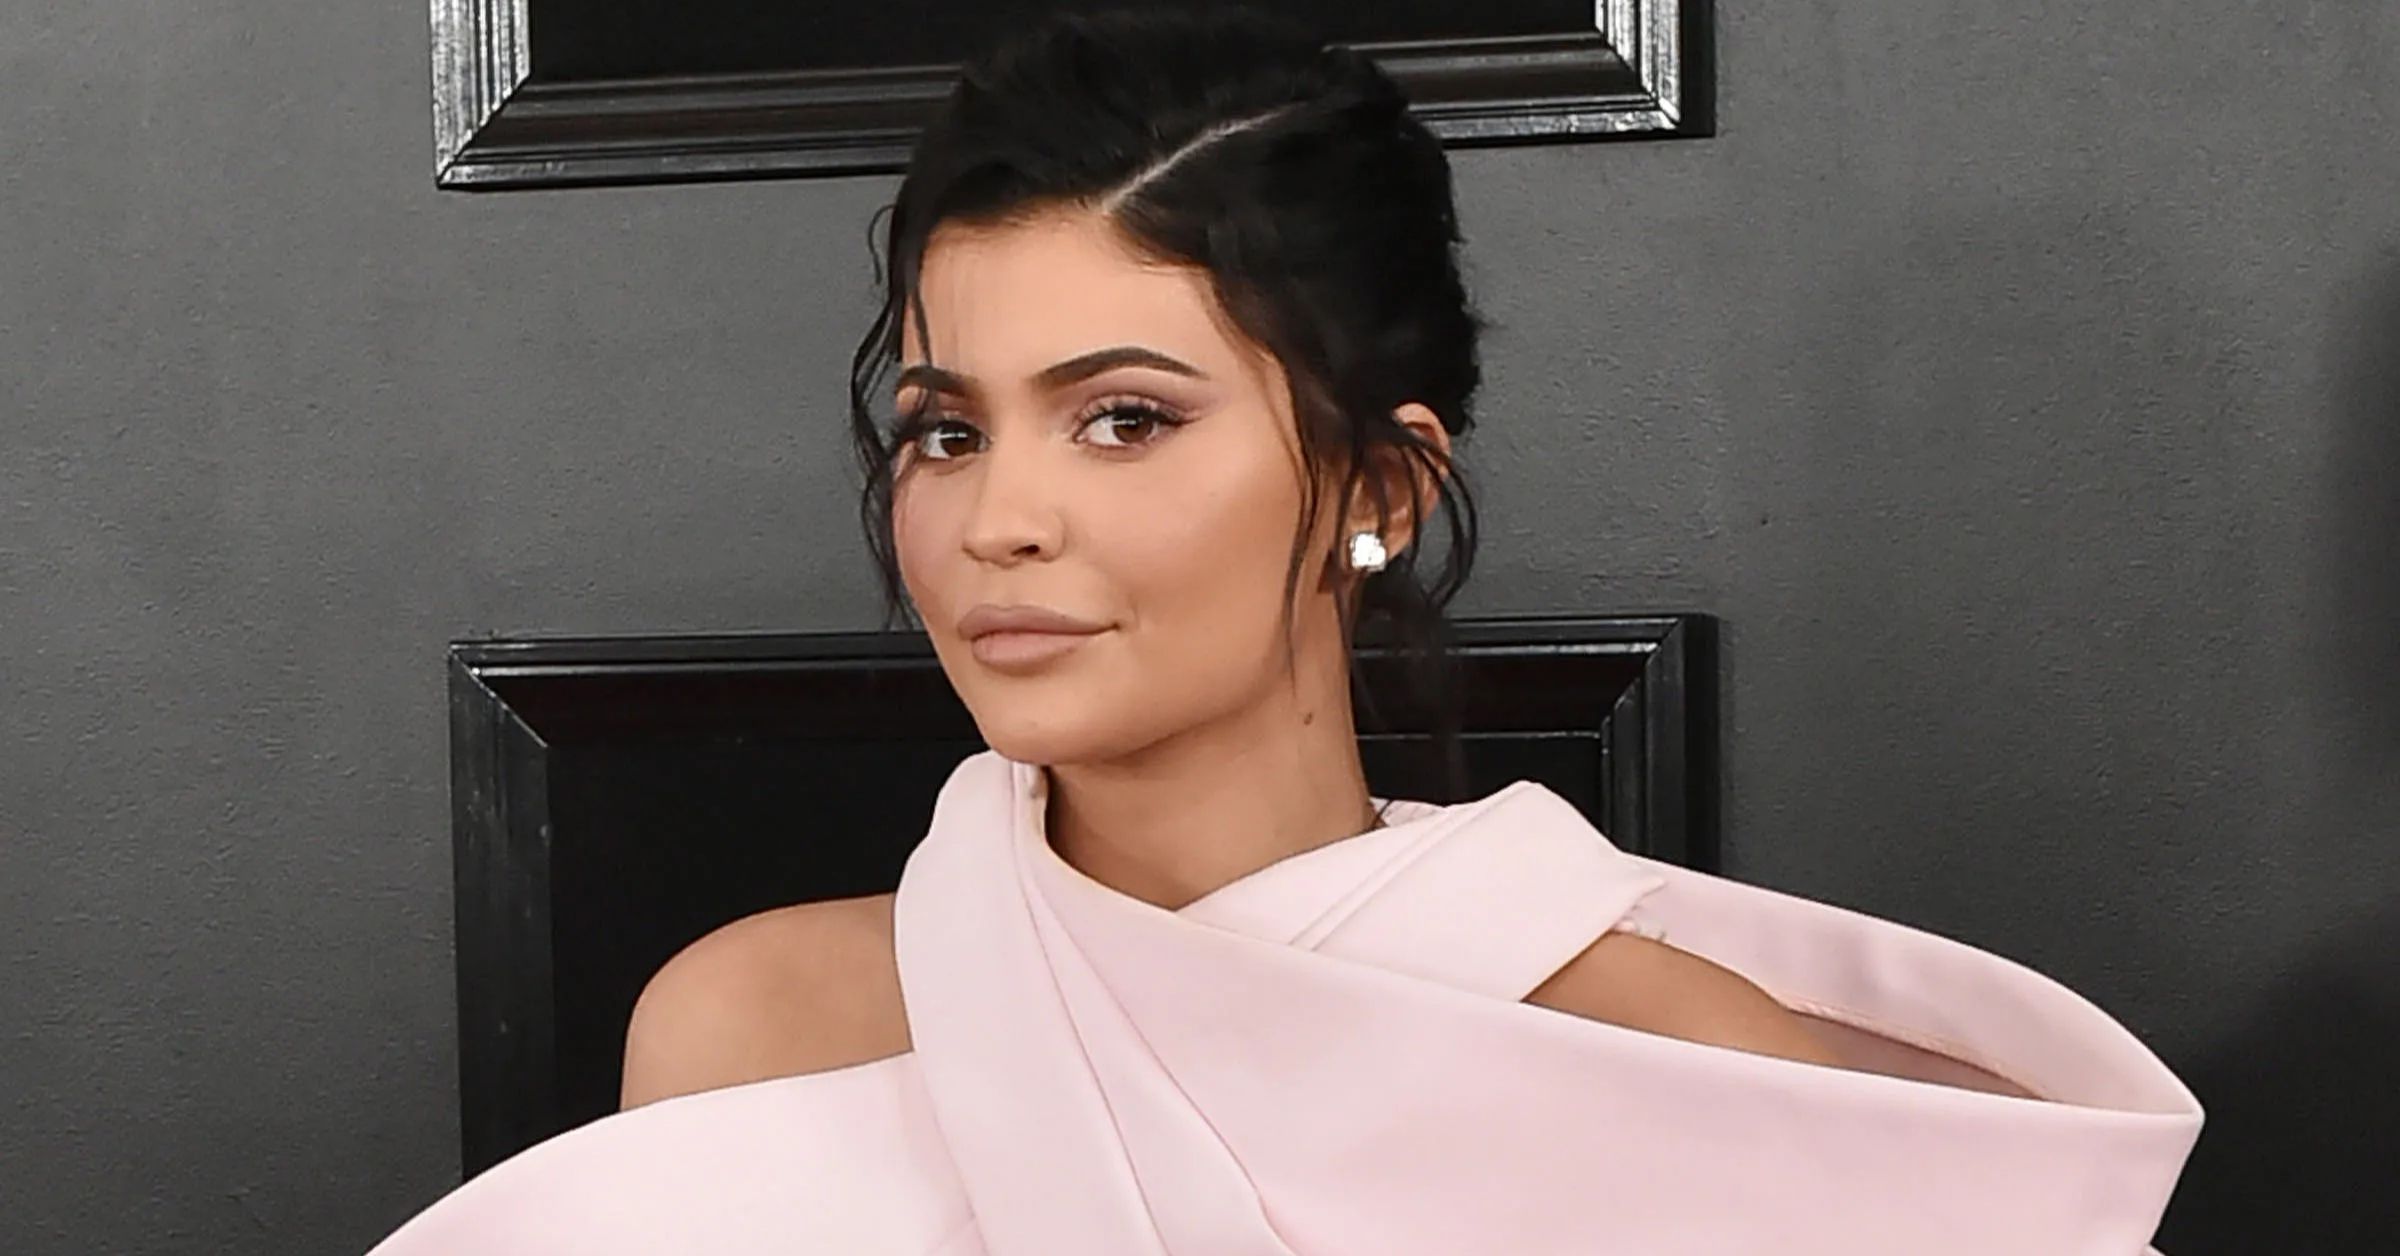 Kylie Jenner Responds to Speculation She Broke Up With Travis Scott - The Blast